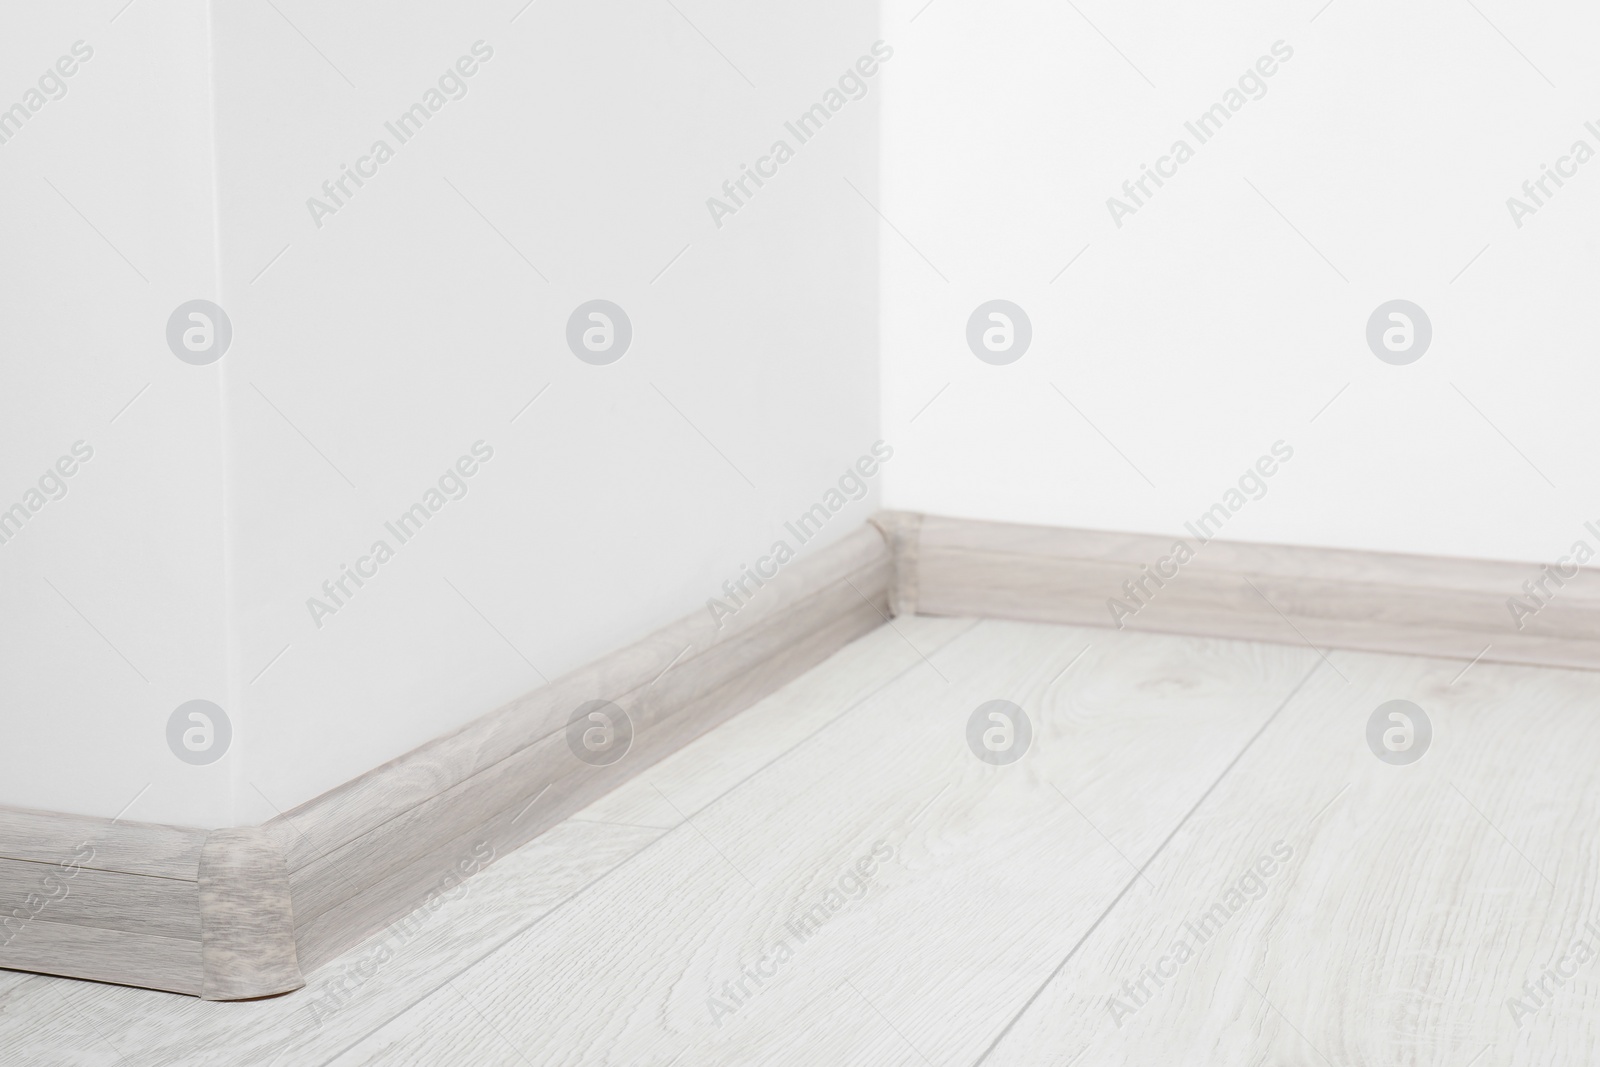 Photo of Wooden plinth with connectors on laminated floor near white wall indoors